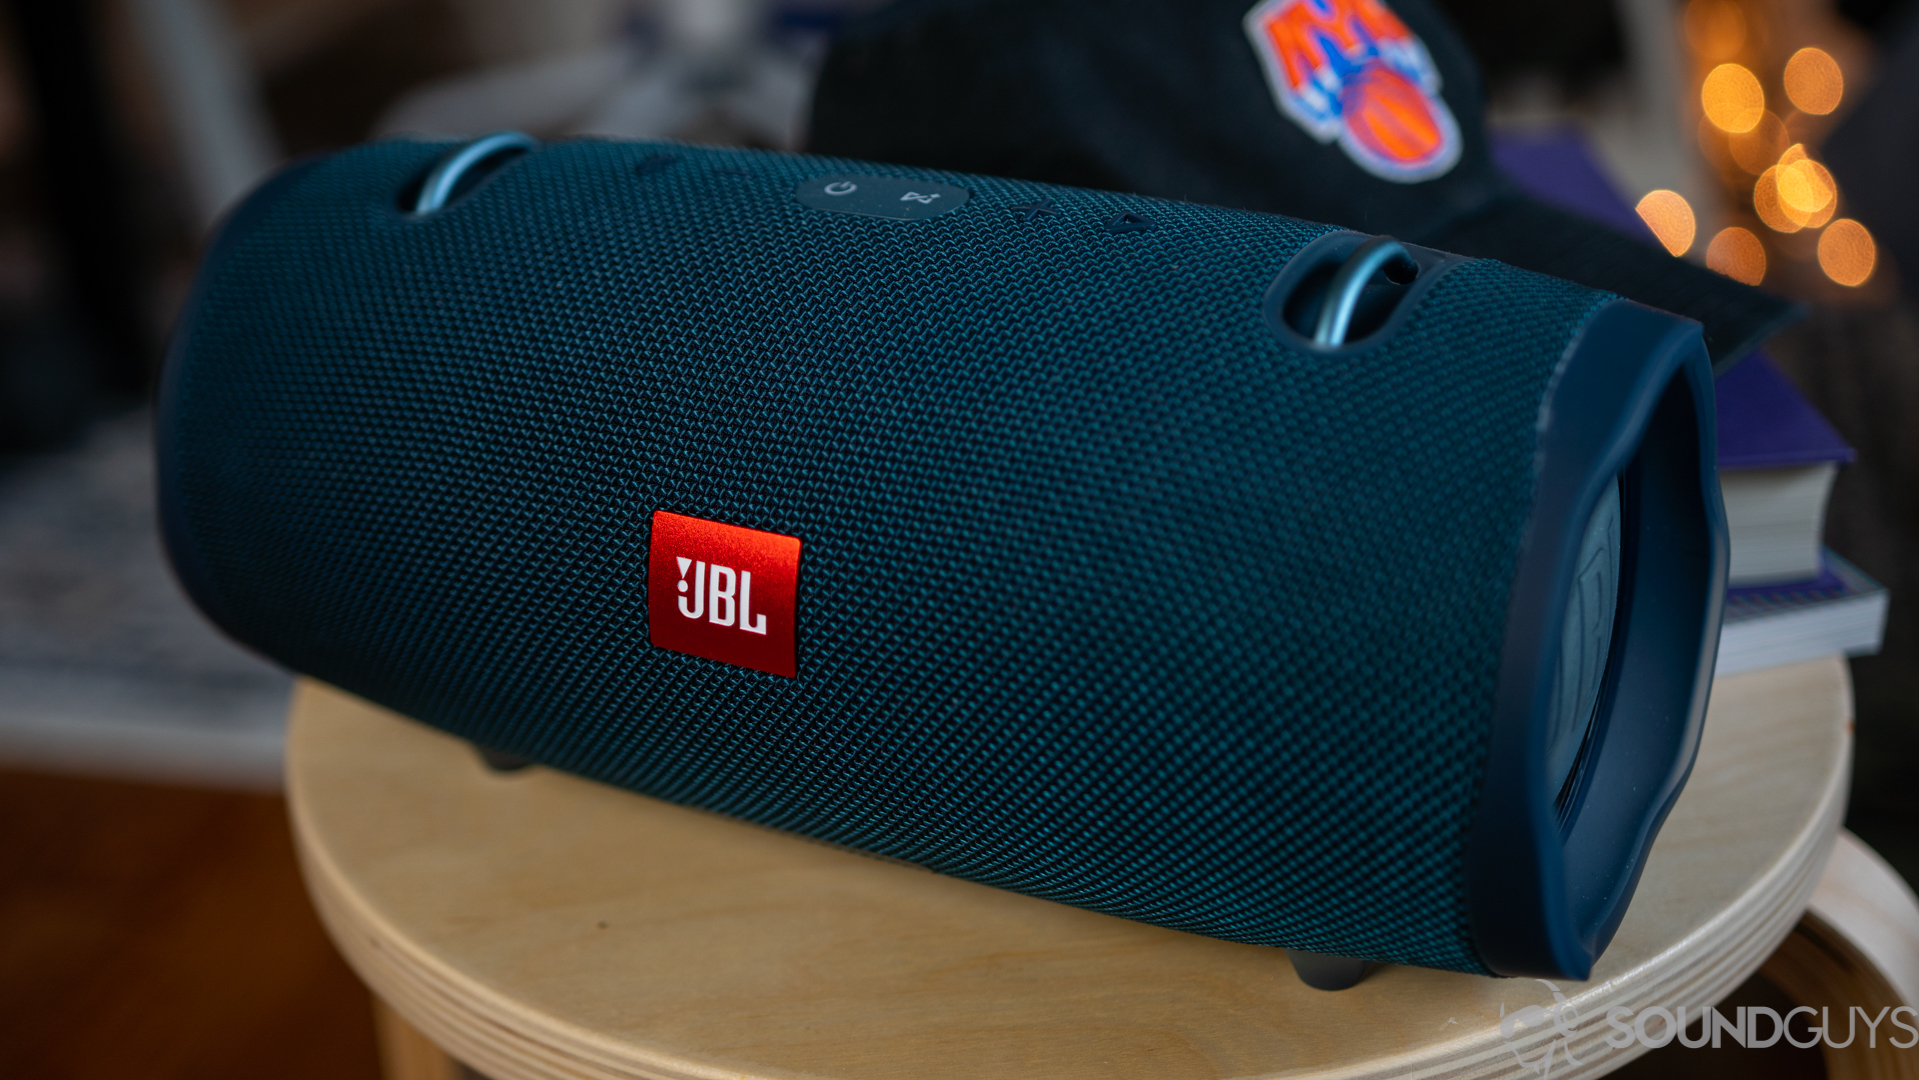 Close up of the blue JBL Xtreme 2 speaker on a wooden stool with a hat in the background.